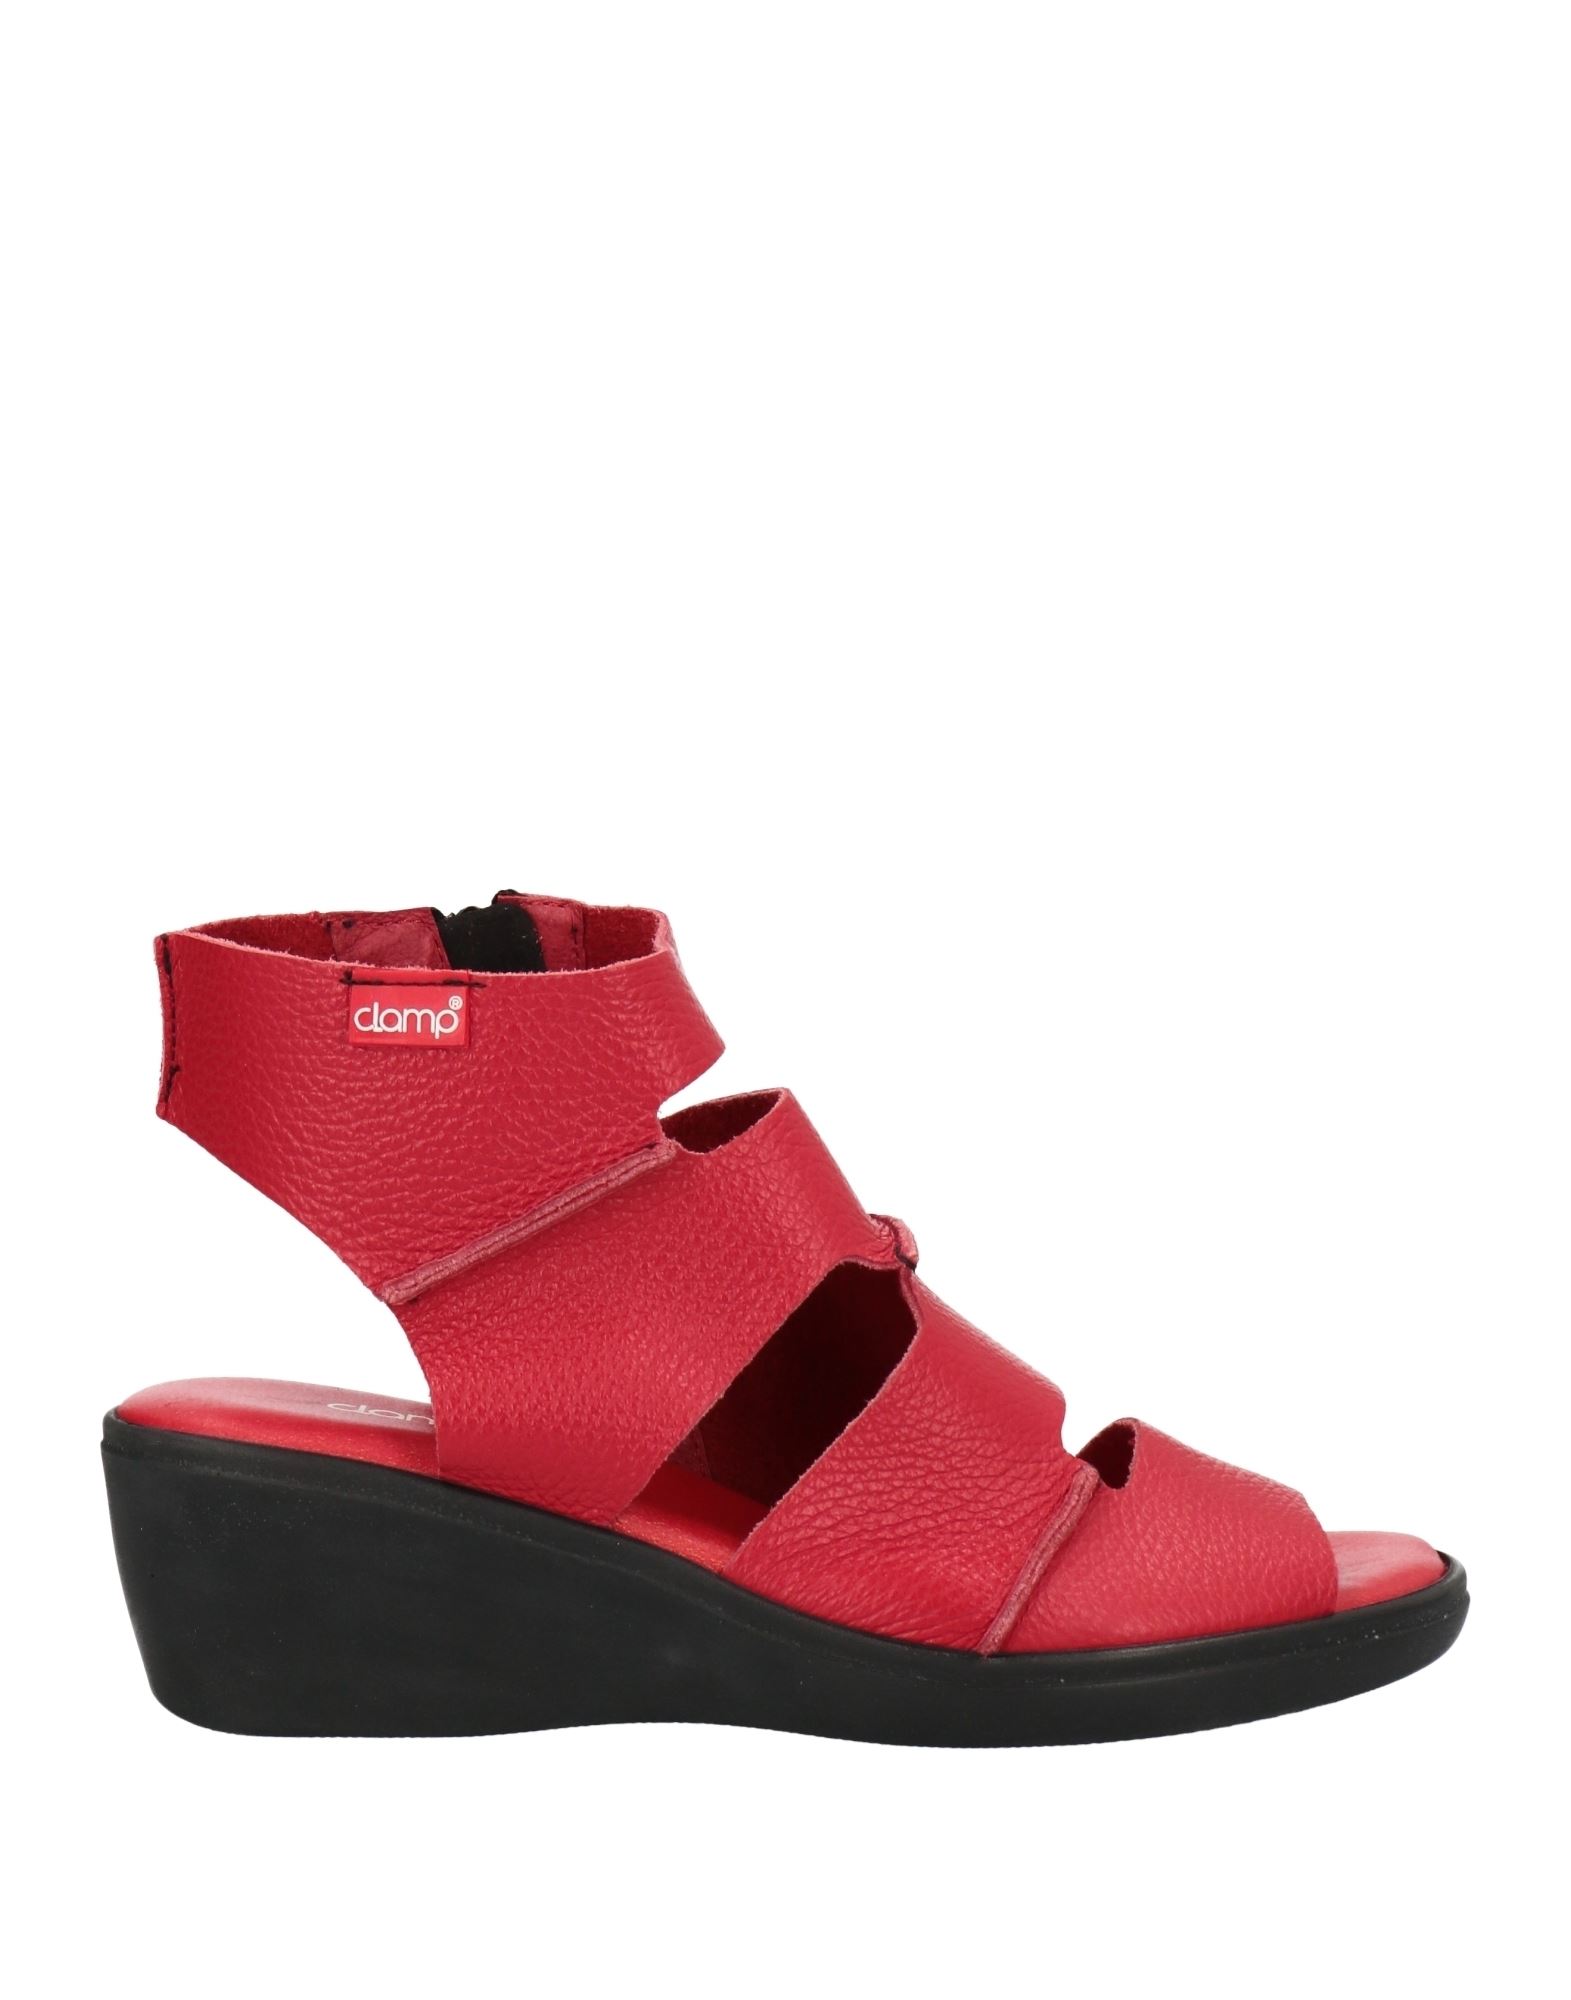 Clamp Sandals In Red